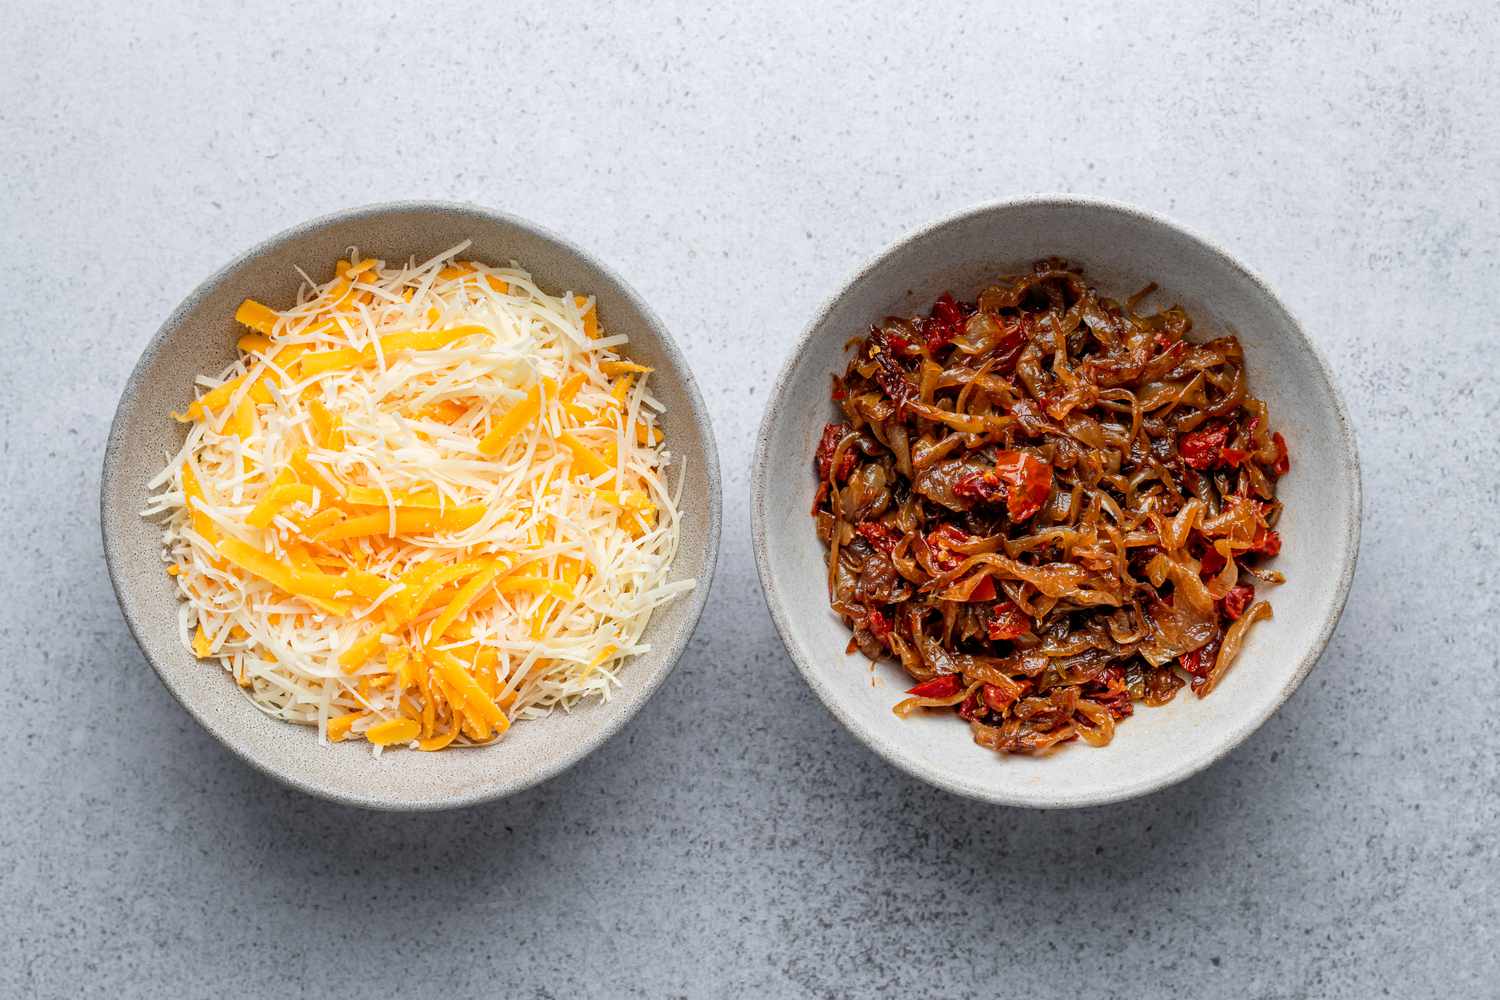 caramelized onions and other ingredients combined in bowl with cheese in separate bowl